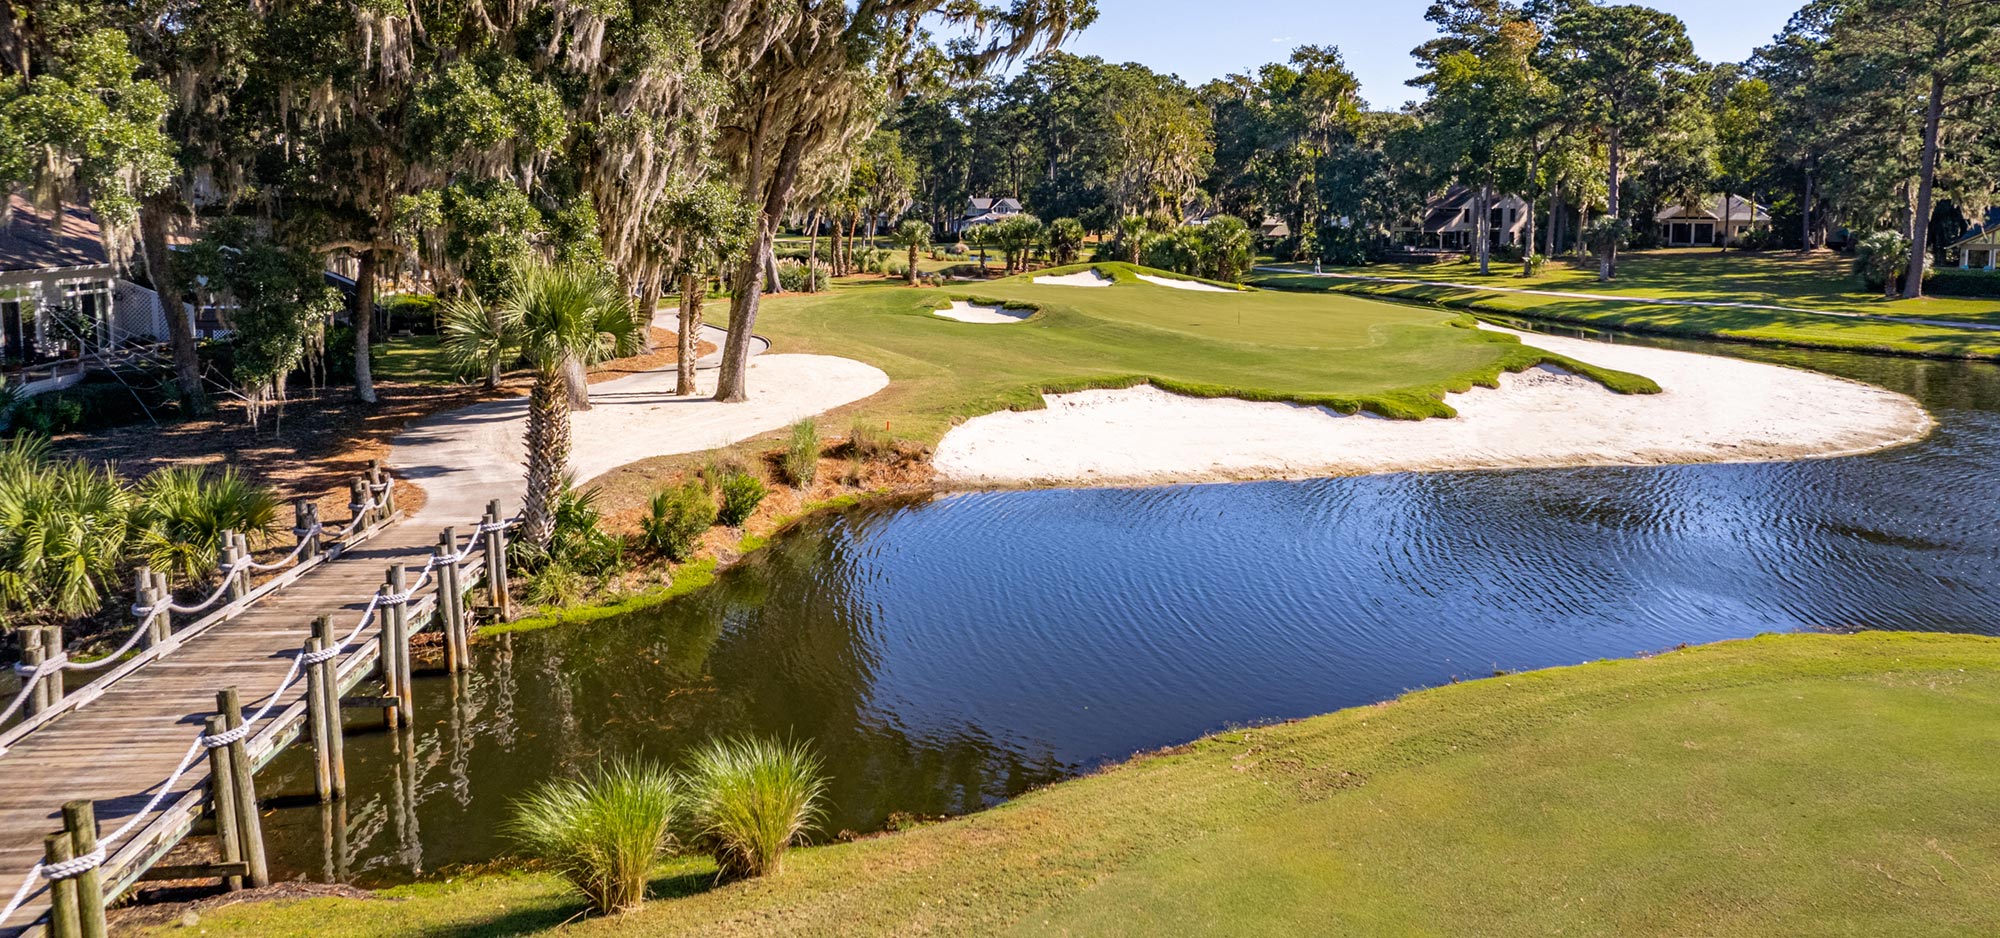 Water hazard, sand traps and green on one of the six championship golf courses at The Landings.